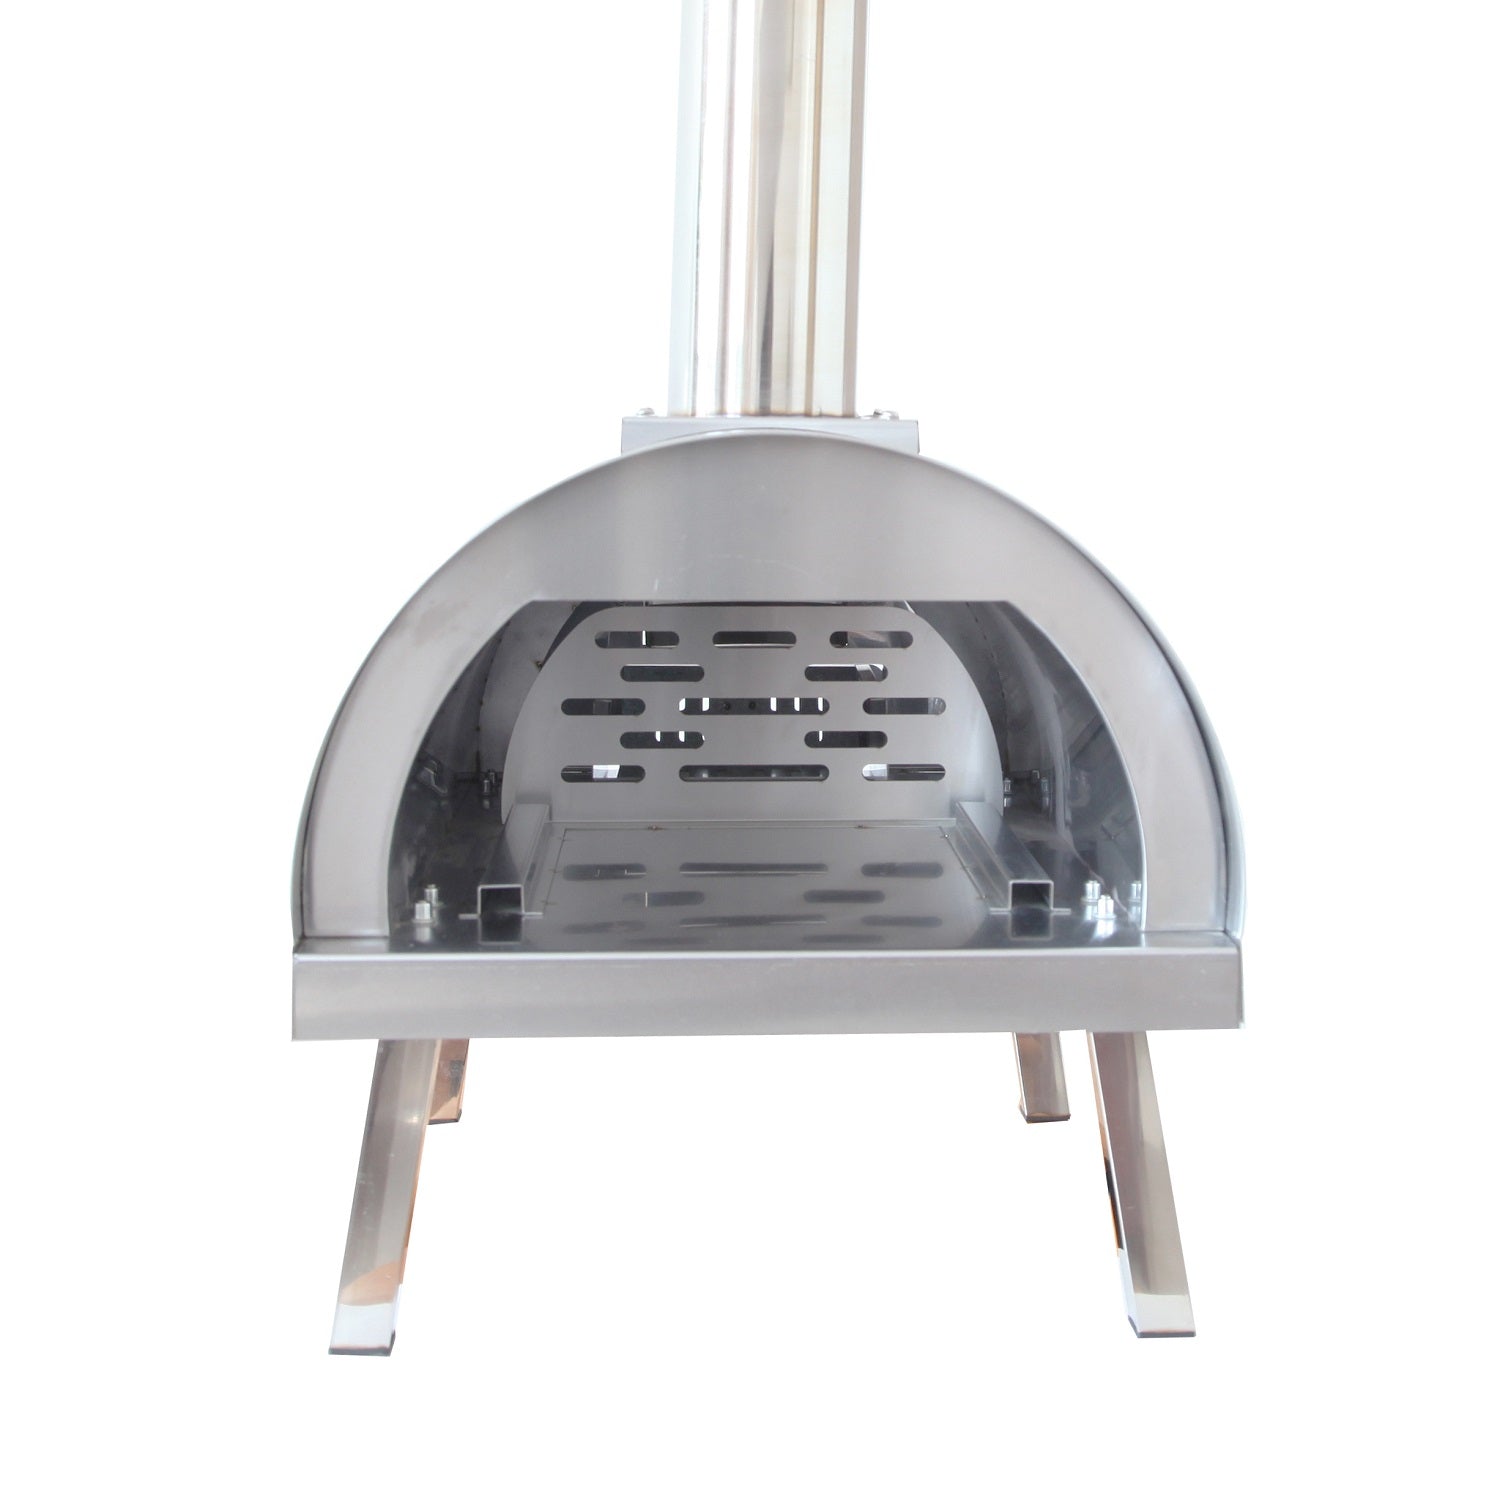 Crown stainless steel wood burning BBQ outdoor pizza oven w/Accessories 86002